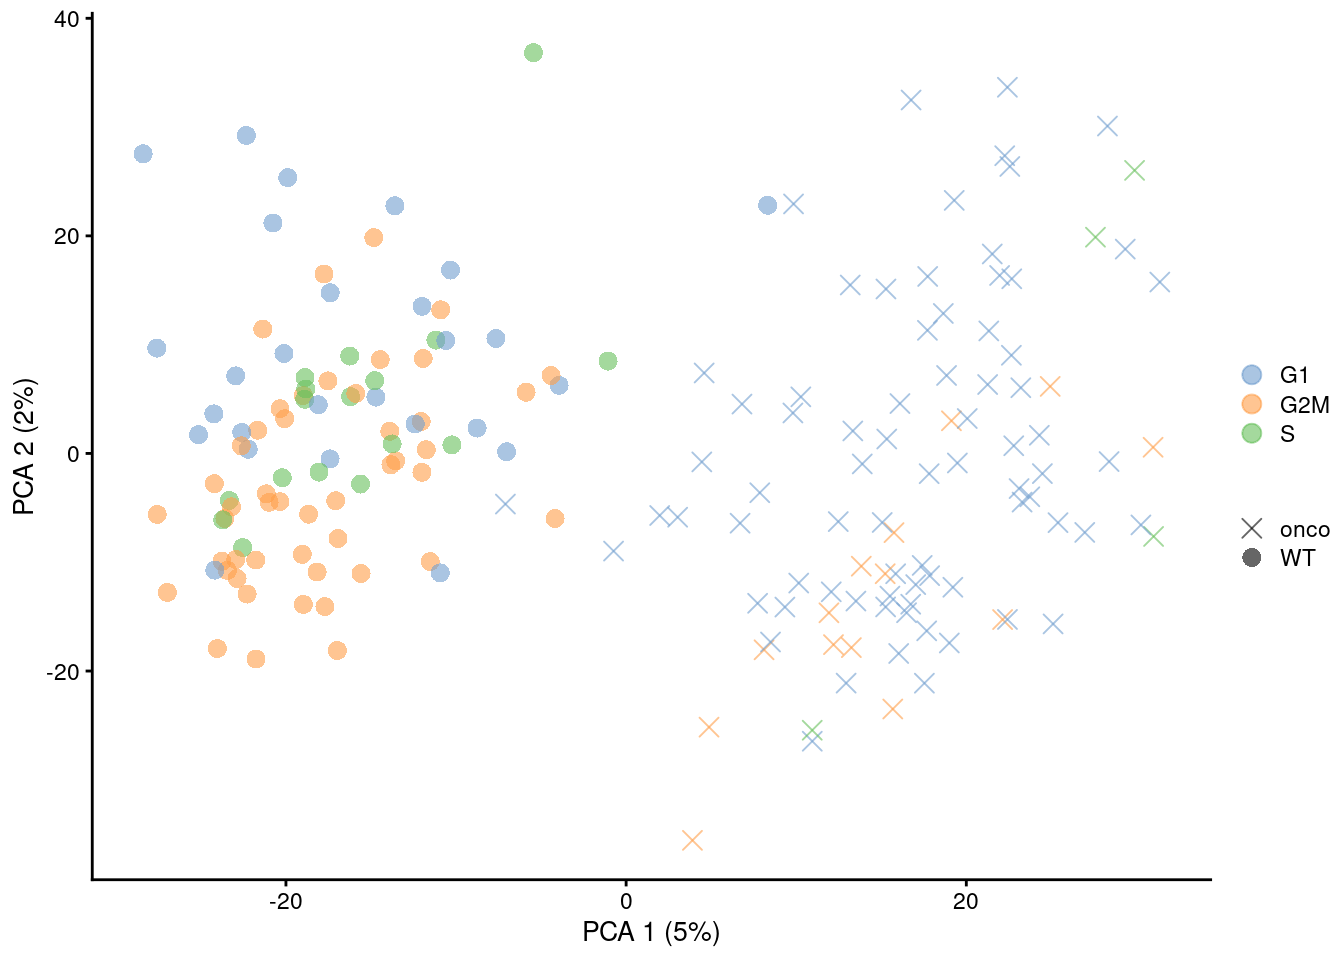 PCA plots of the 416B dataset, generated before and after removal of cell cycle-related genes. Each point corresponds to a cell that is colored by the inferred phase and shaped by oncogene induction status.